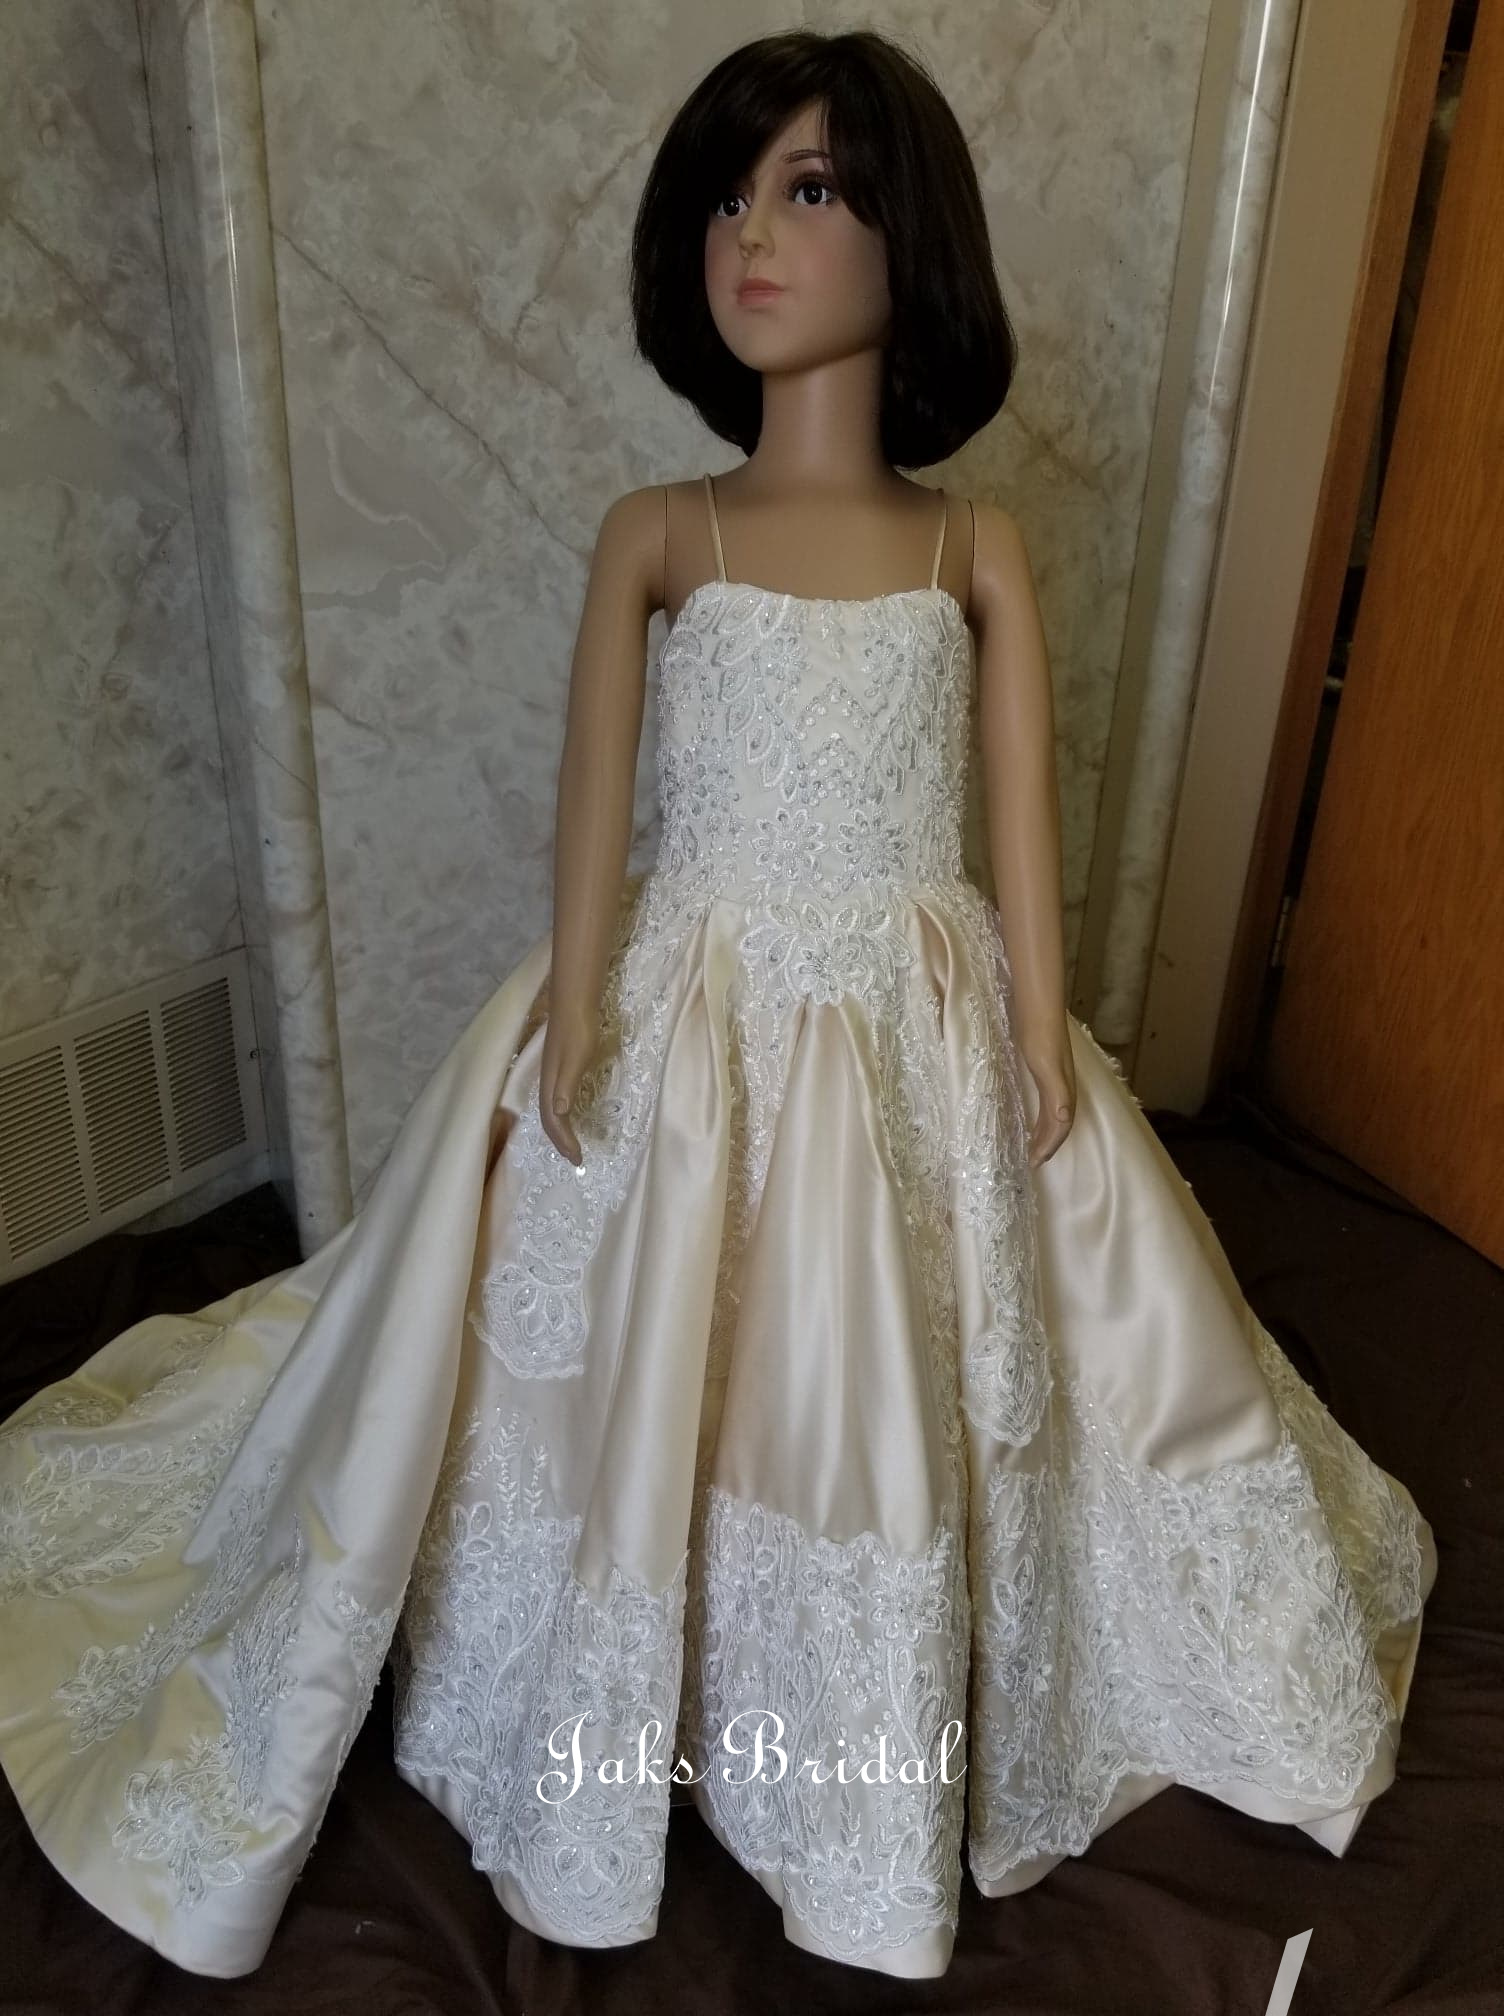 Jak's custom creates your flower girl dress to match your own wedding gown.